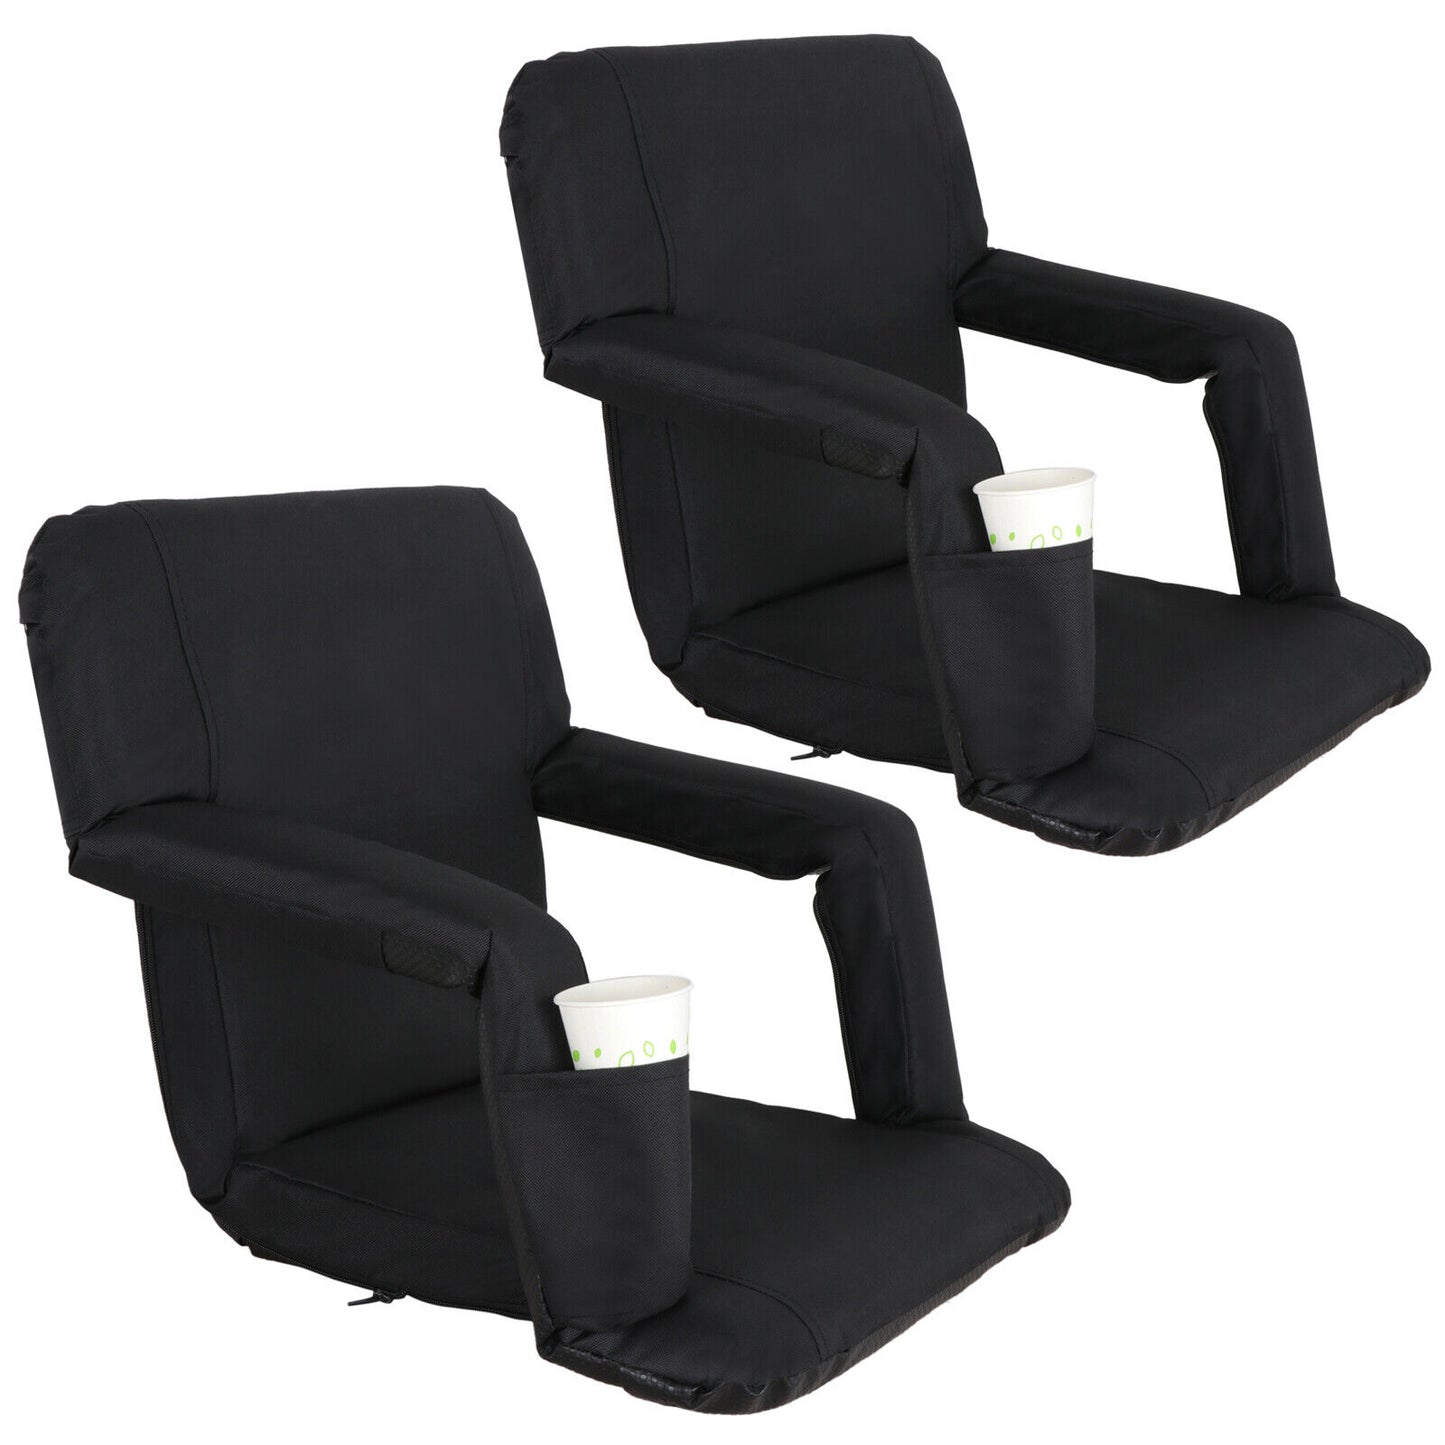 2PCS Stadium Seat for Bleachers Stadium Chair w/Back, Arms 5 Reclining Positions